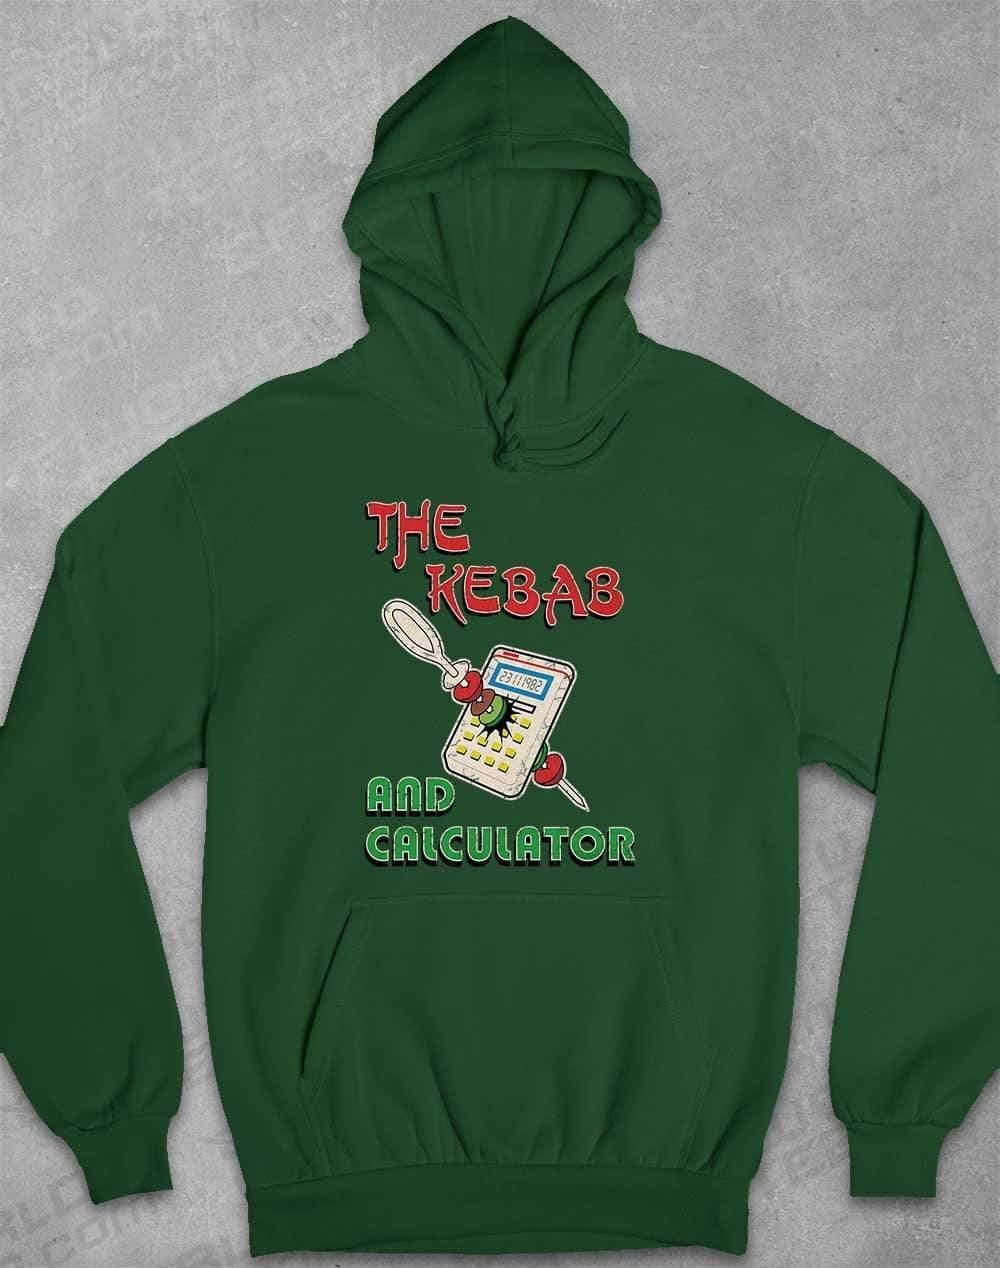 The Kebab and Calculator 1982 Hoodie XS / Bottle Green  - Off World Tees